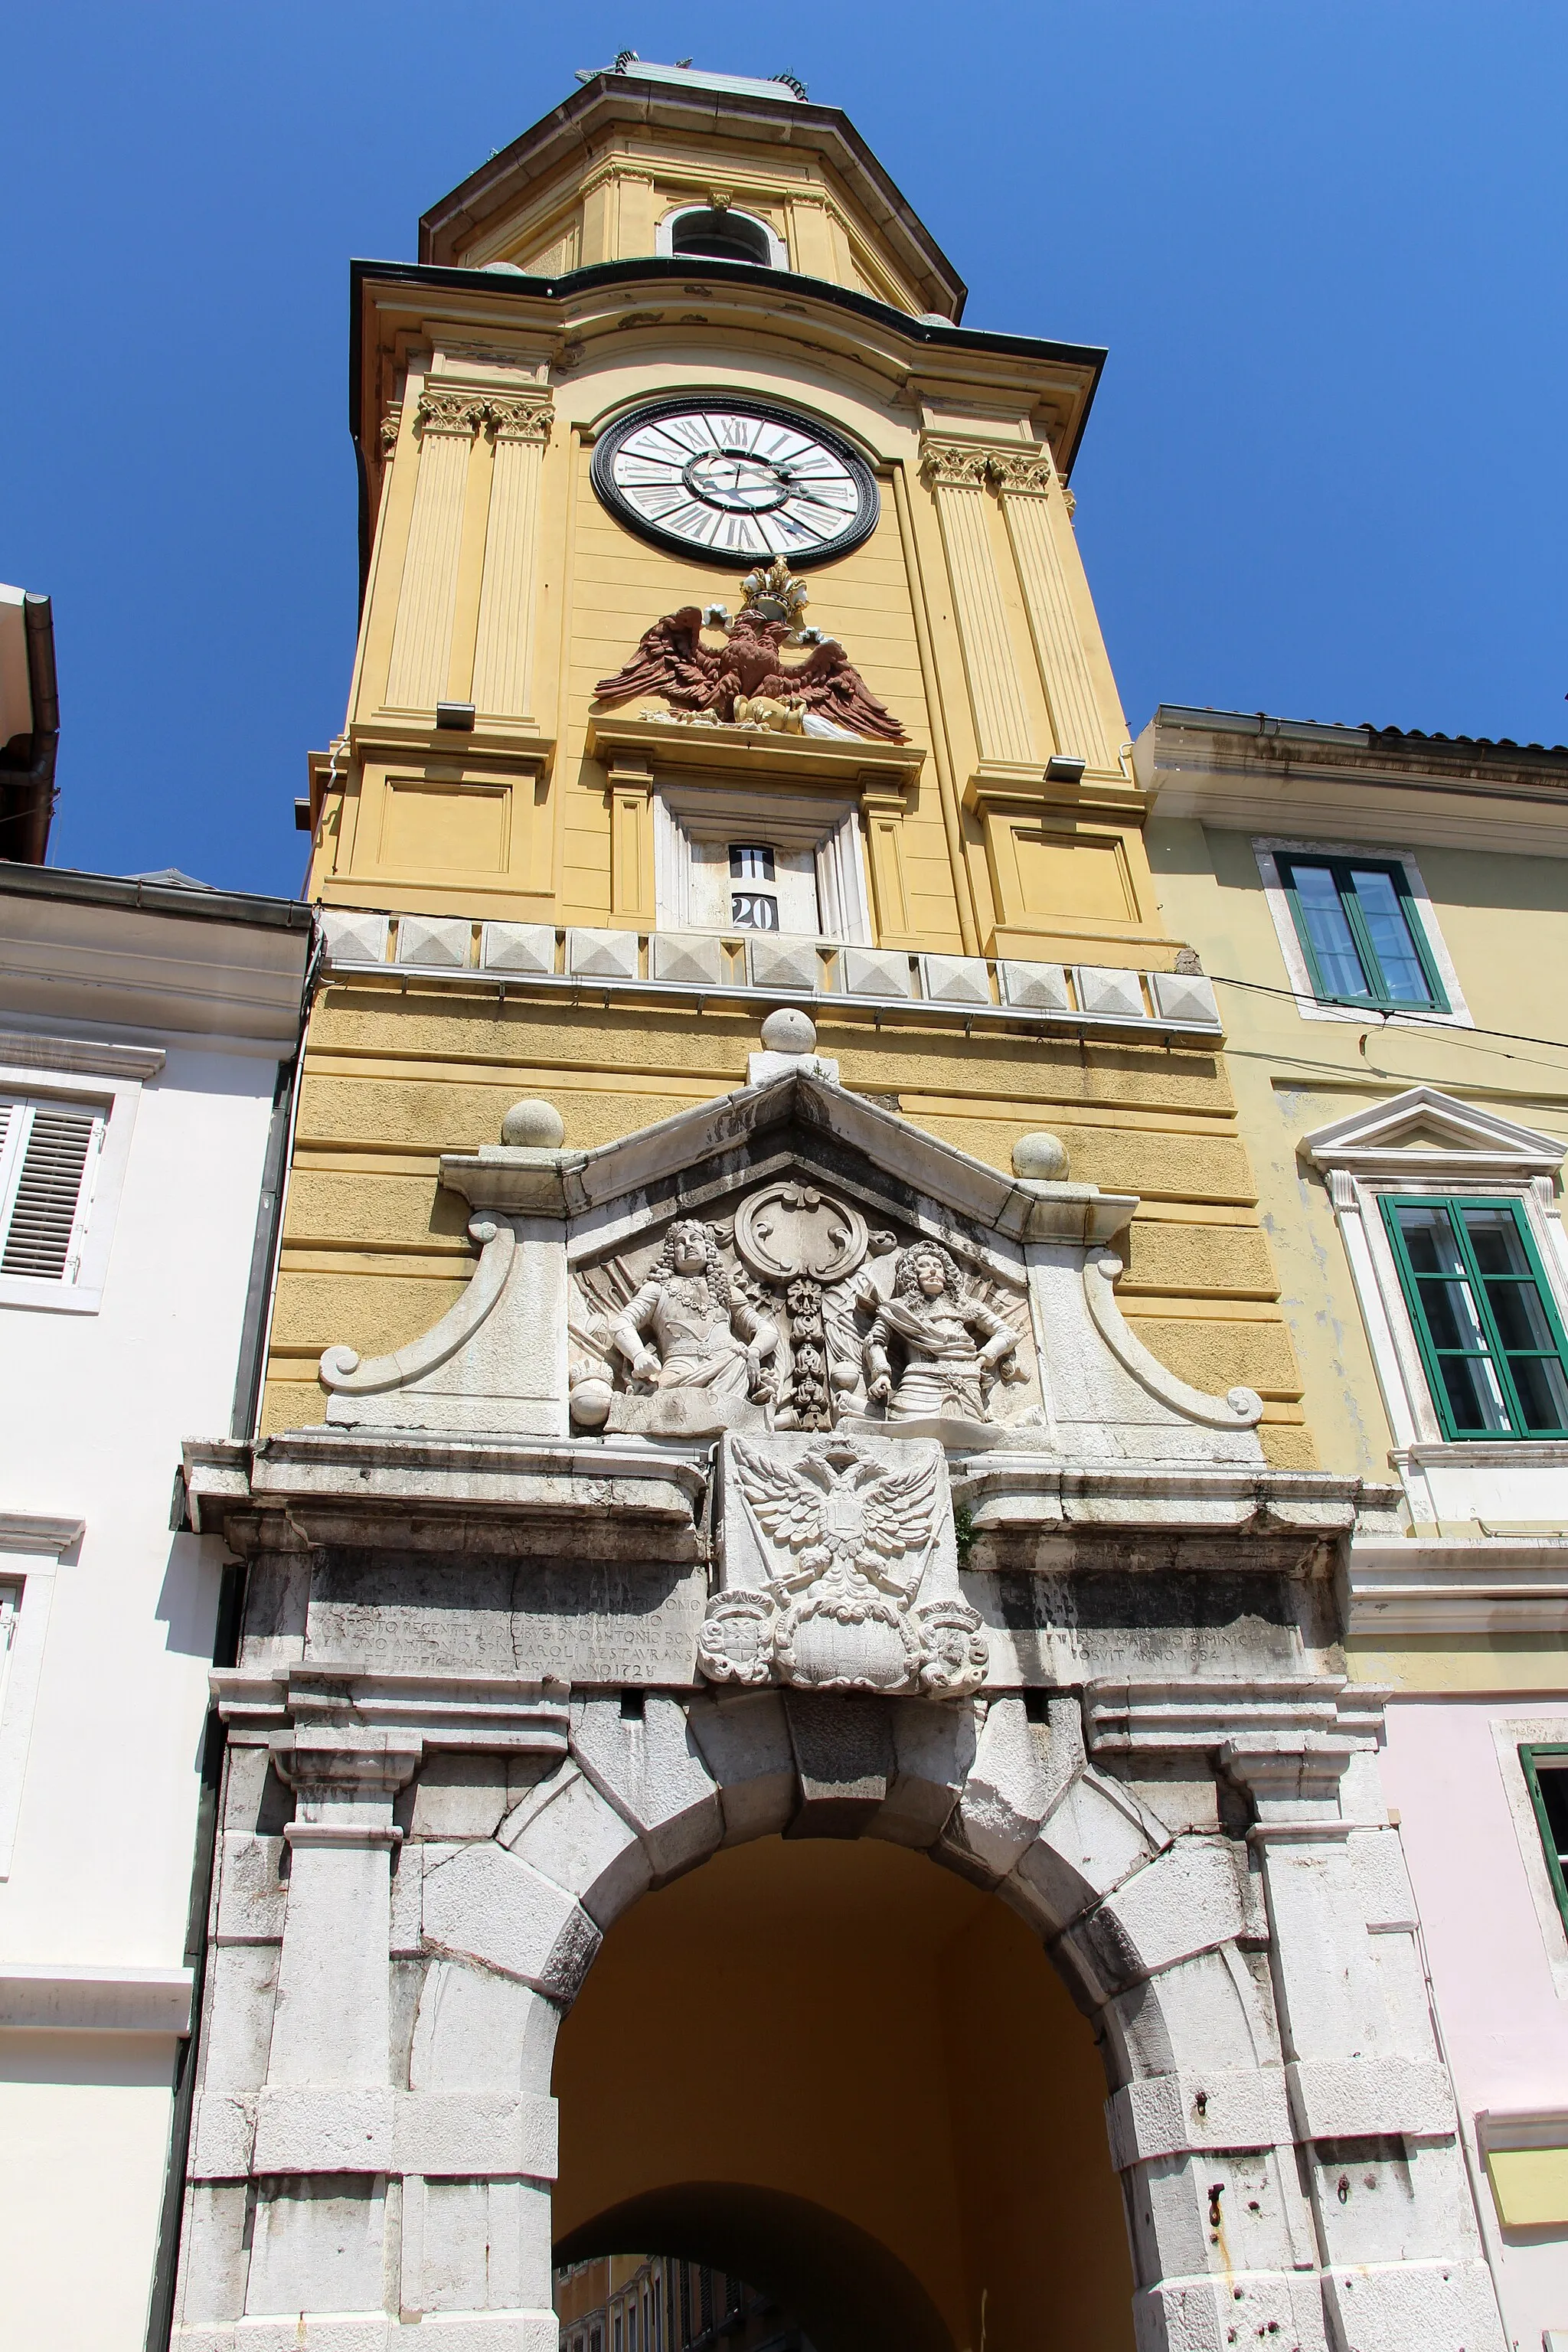 Photo showing: Luka - Korzo

City Clock Tower was built in the Middle Ages, probably on the foundations of the Late Antique littoral town gates. Some baroque phases of its construction can be seen on the lower part of the front of the Tower, which are characterised by a richly decorated portal, an imperial coat of arms carved out of stone and a relief of the Austrian emperors Leopold and Charles VI.